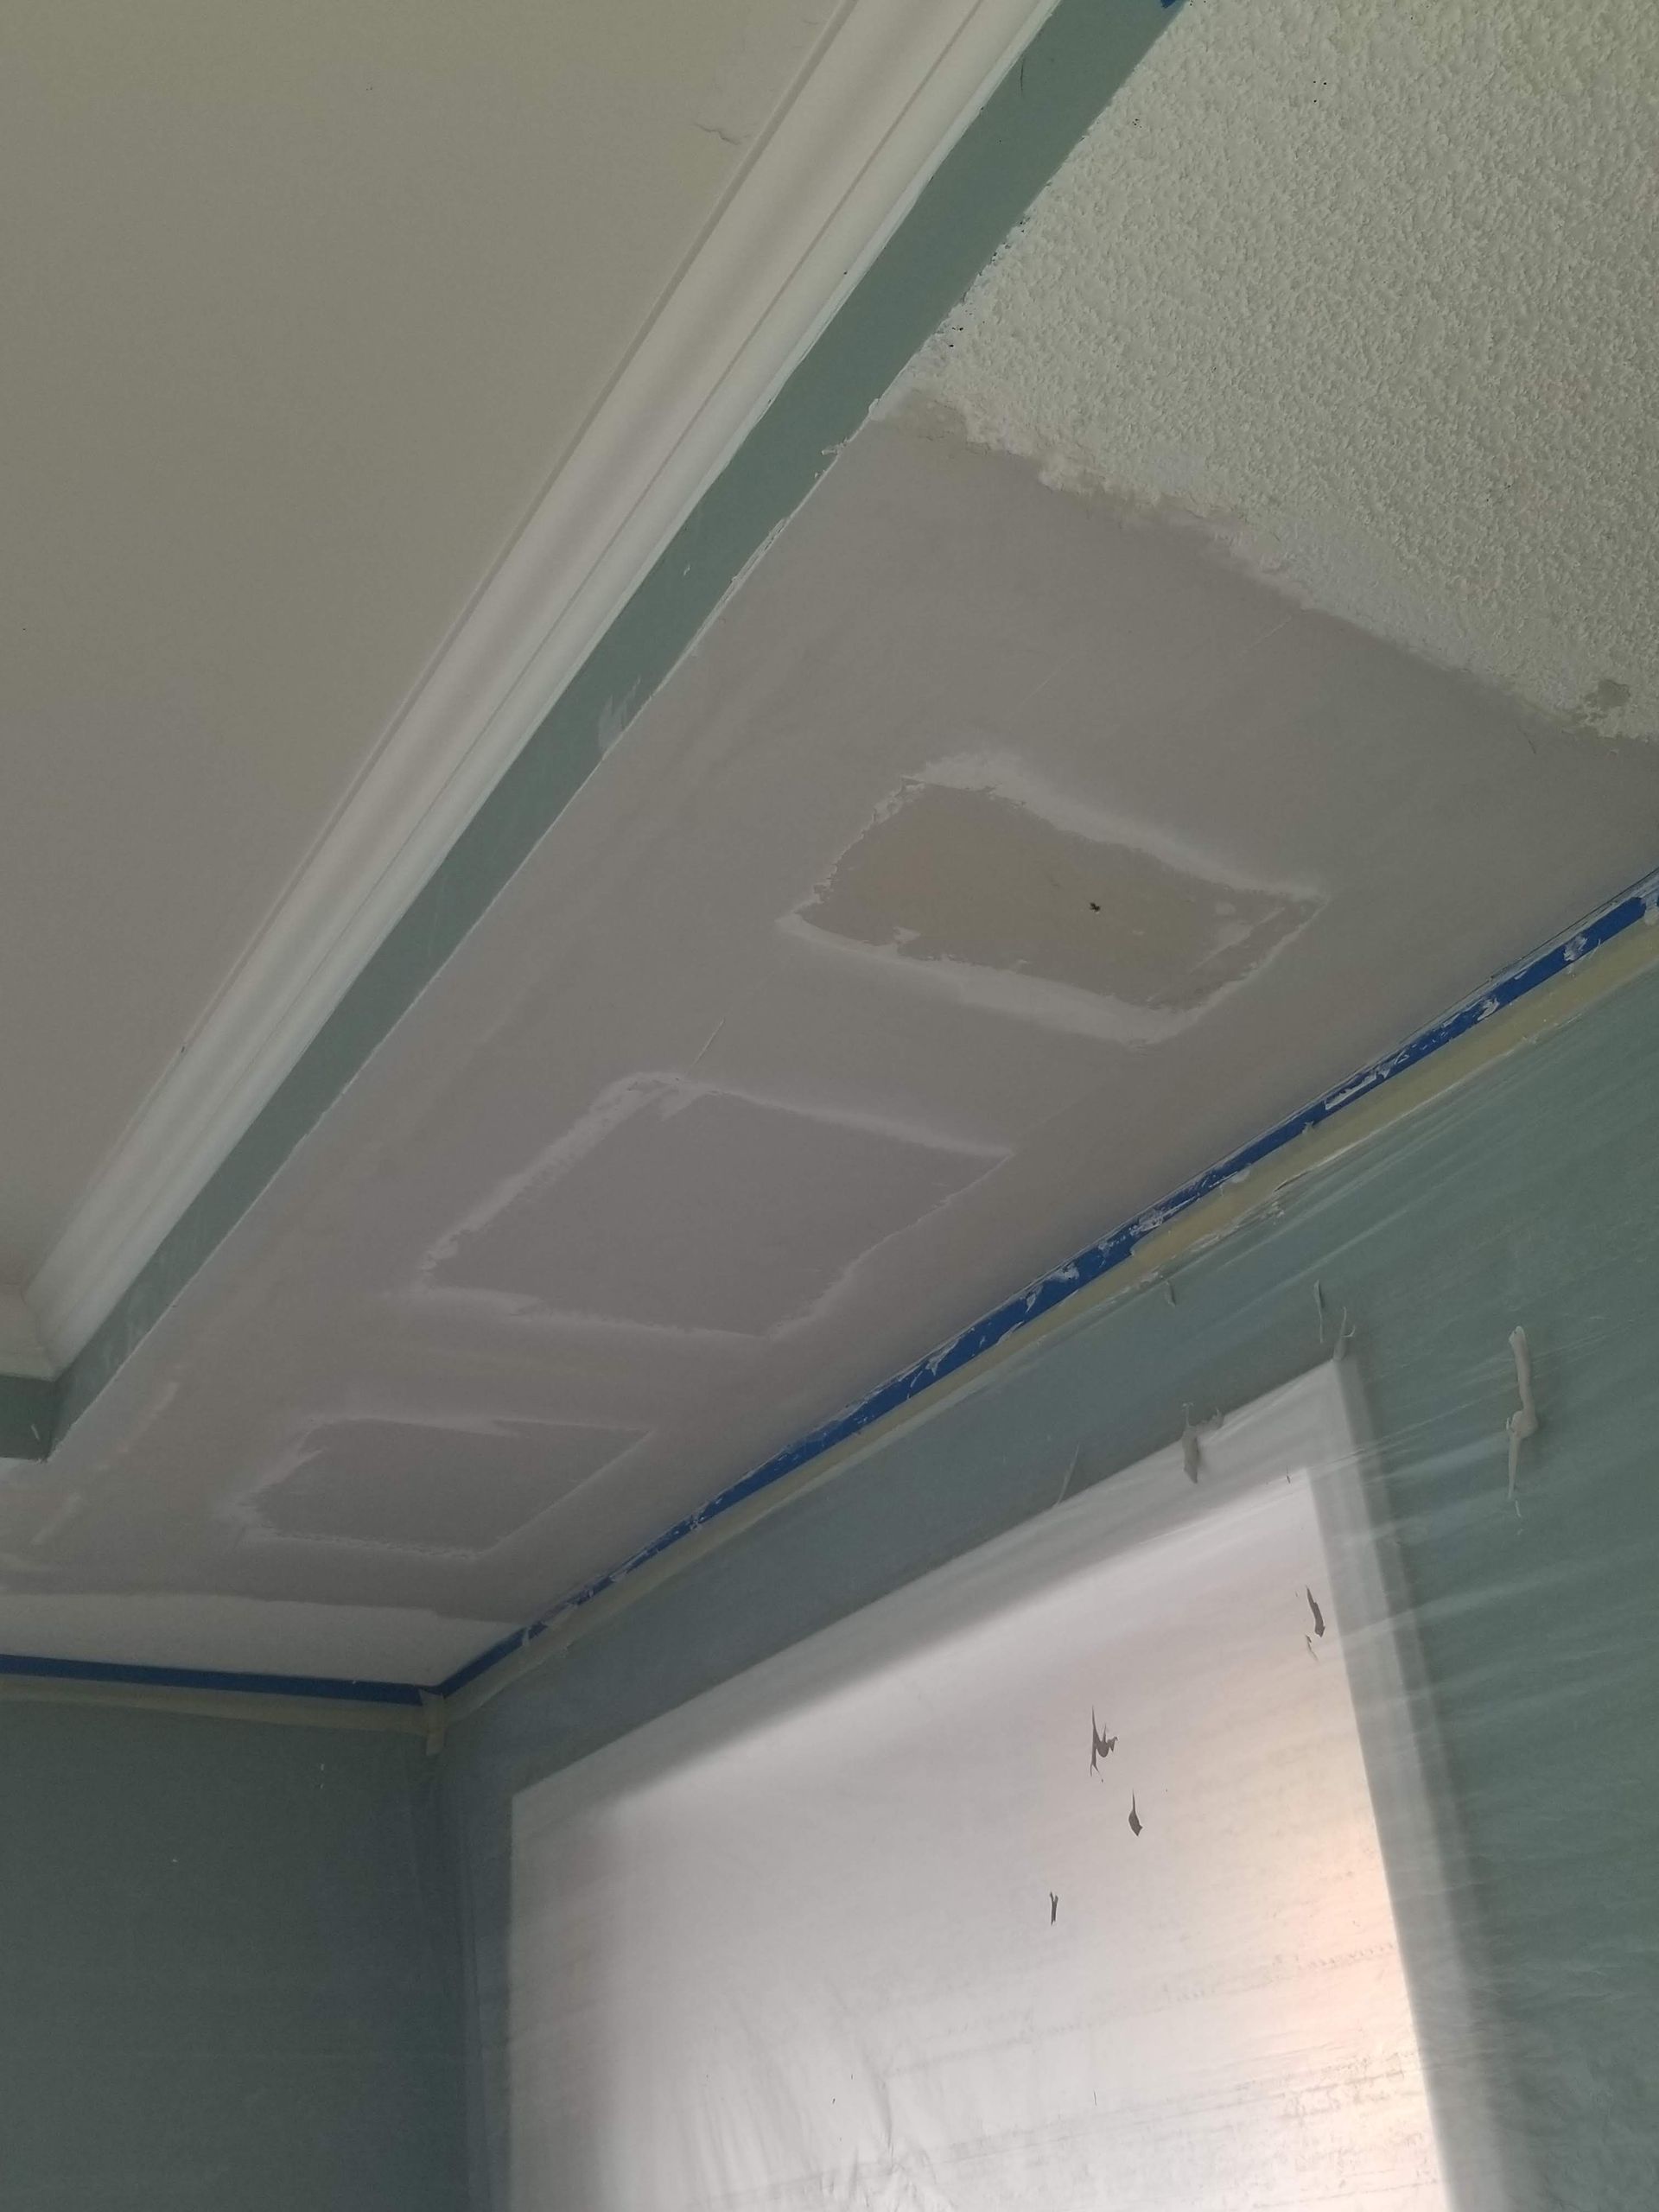 new drywall installed during ceiling repair and popcorn texture match